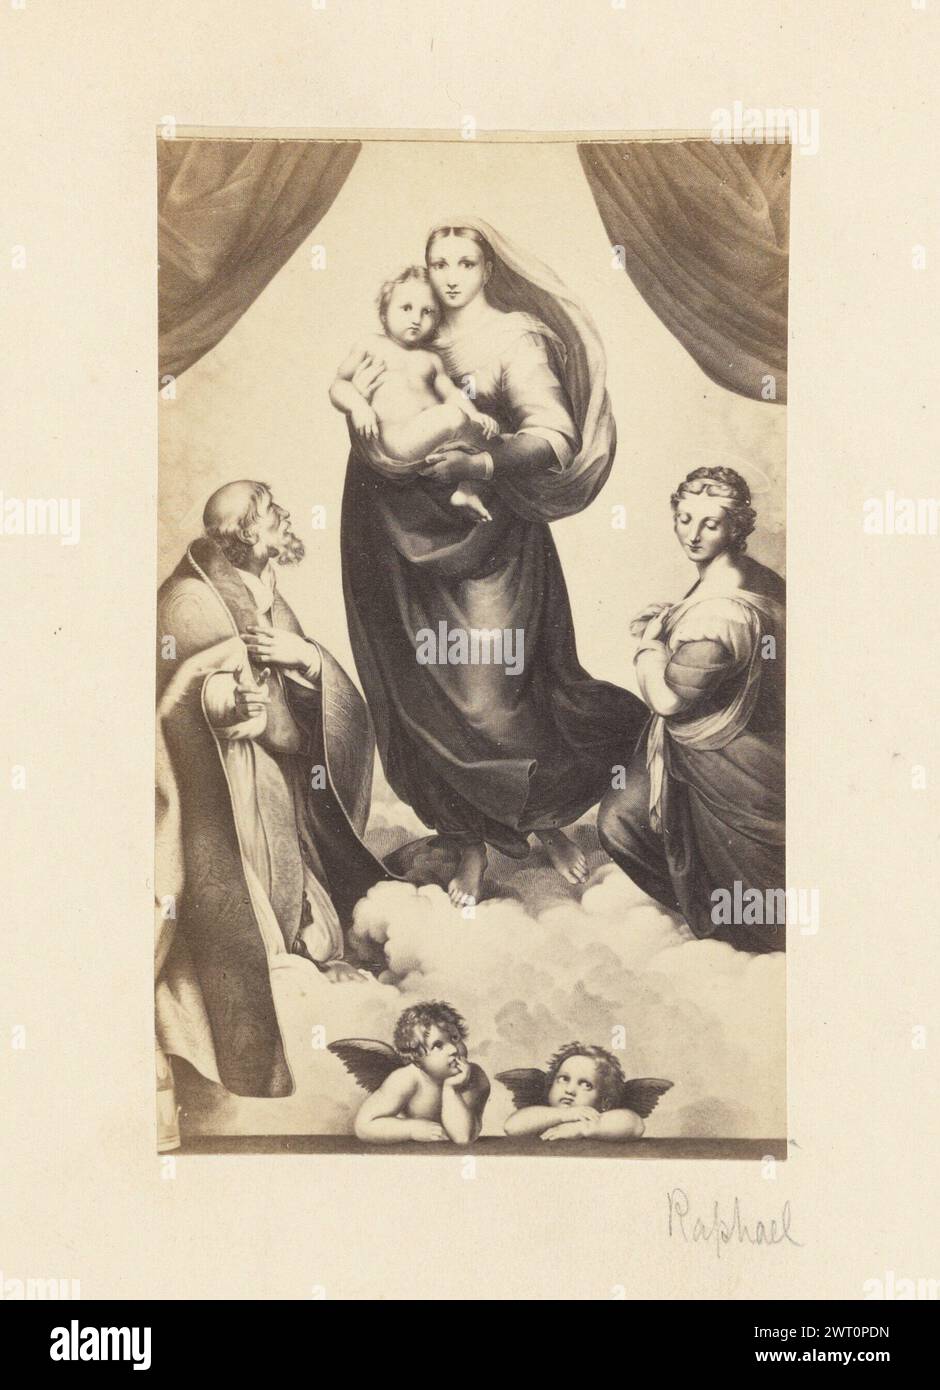 'Sistine Madonna' by Raphael. Unknown, photographer about 1865–1885 Painting depicting the Virgin Mary holding the infant Christ. She is flanked by an elderly man wearing robes (Saint Sixtus) and a woman (Saint Barbara) looking down. The group is standing on clouds. There are two winged cherub resting on their elbows at the bottom of the painting. (Recto, mount) center, below image, pencil: 'Raphael'; Stock Photo